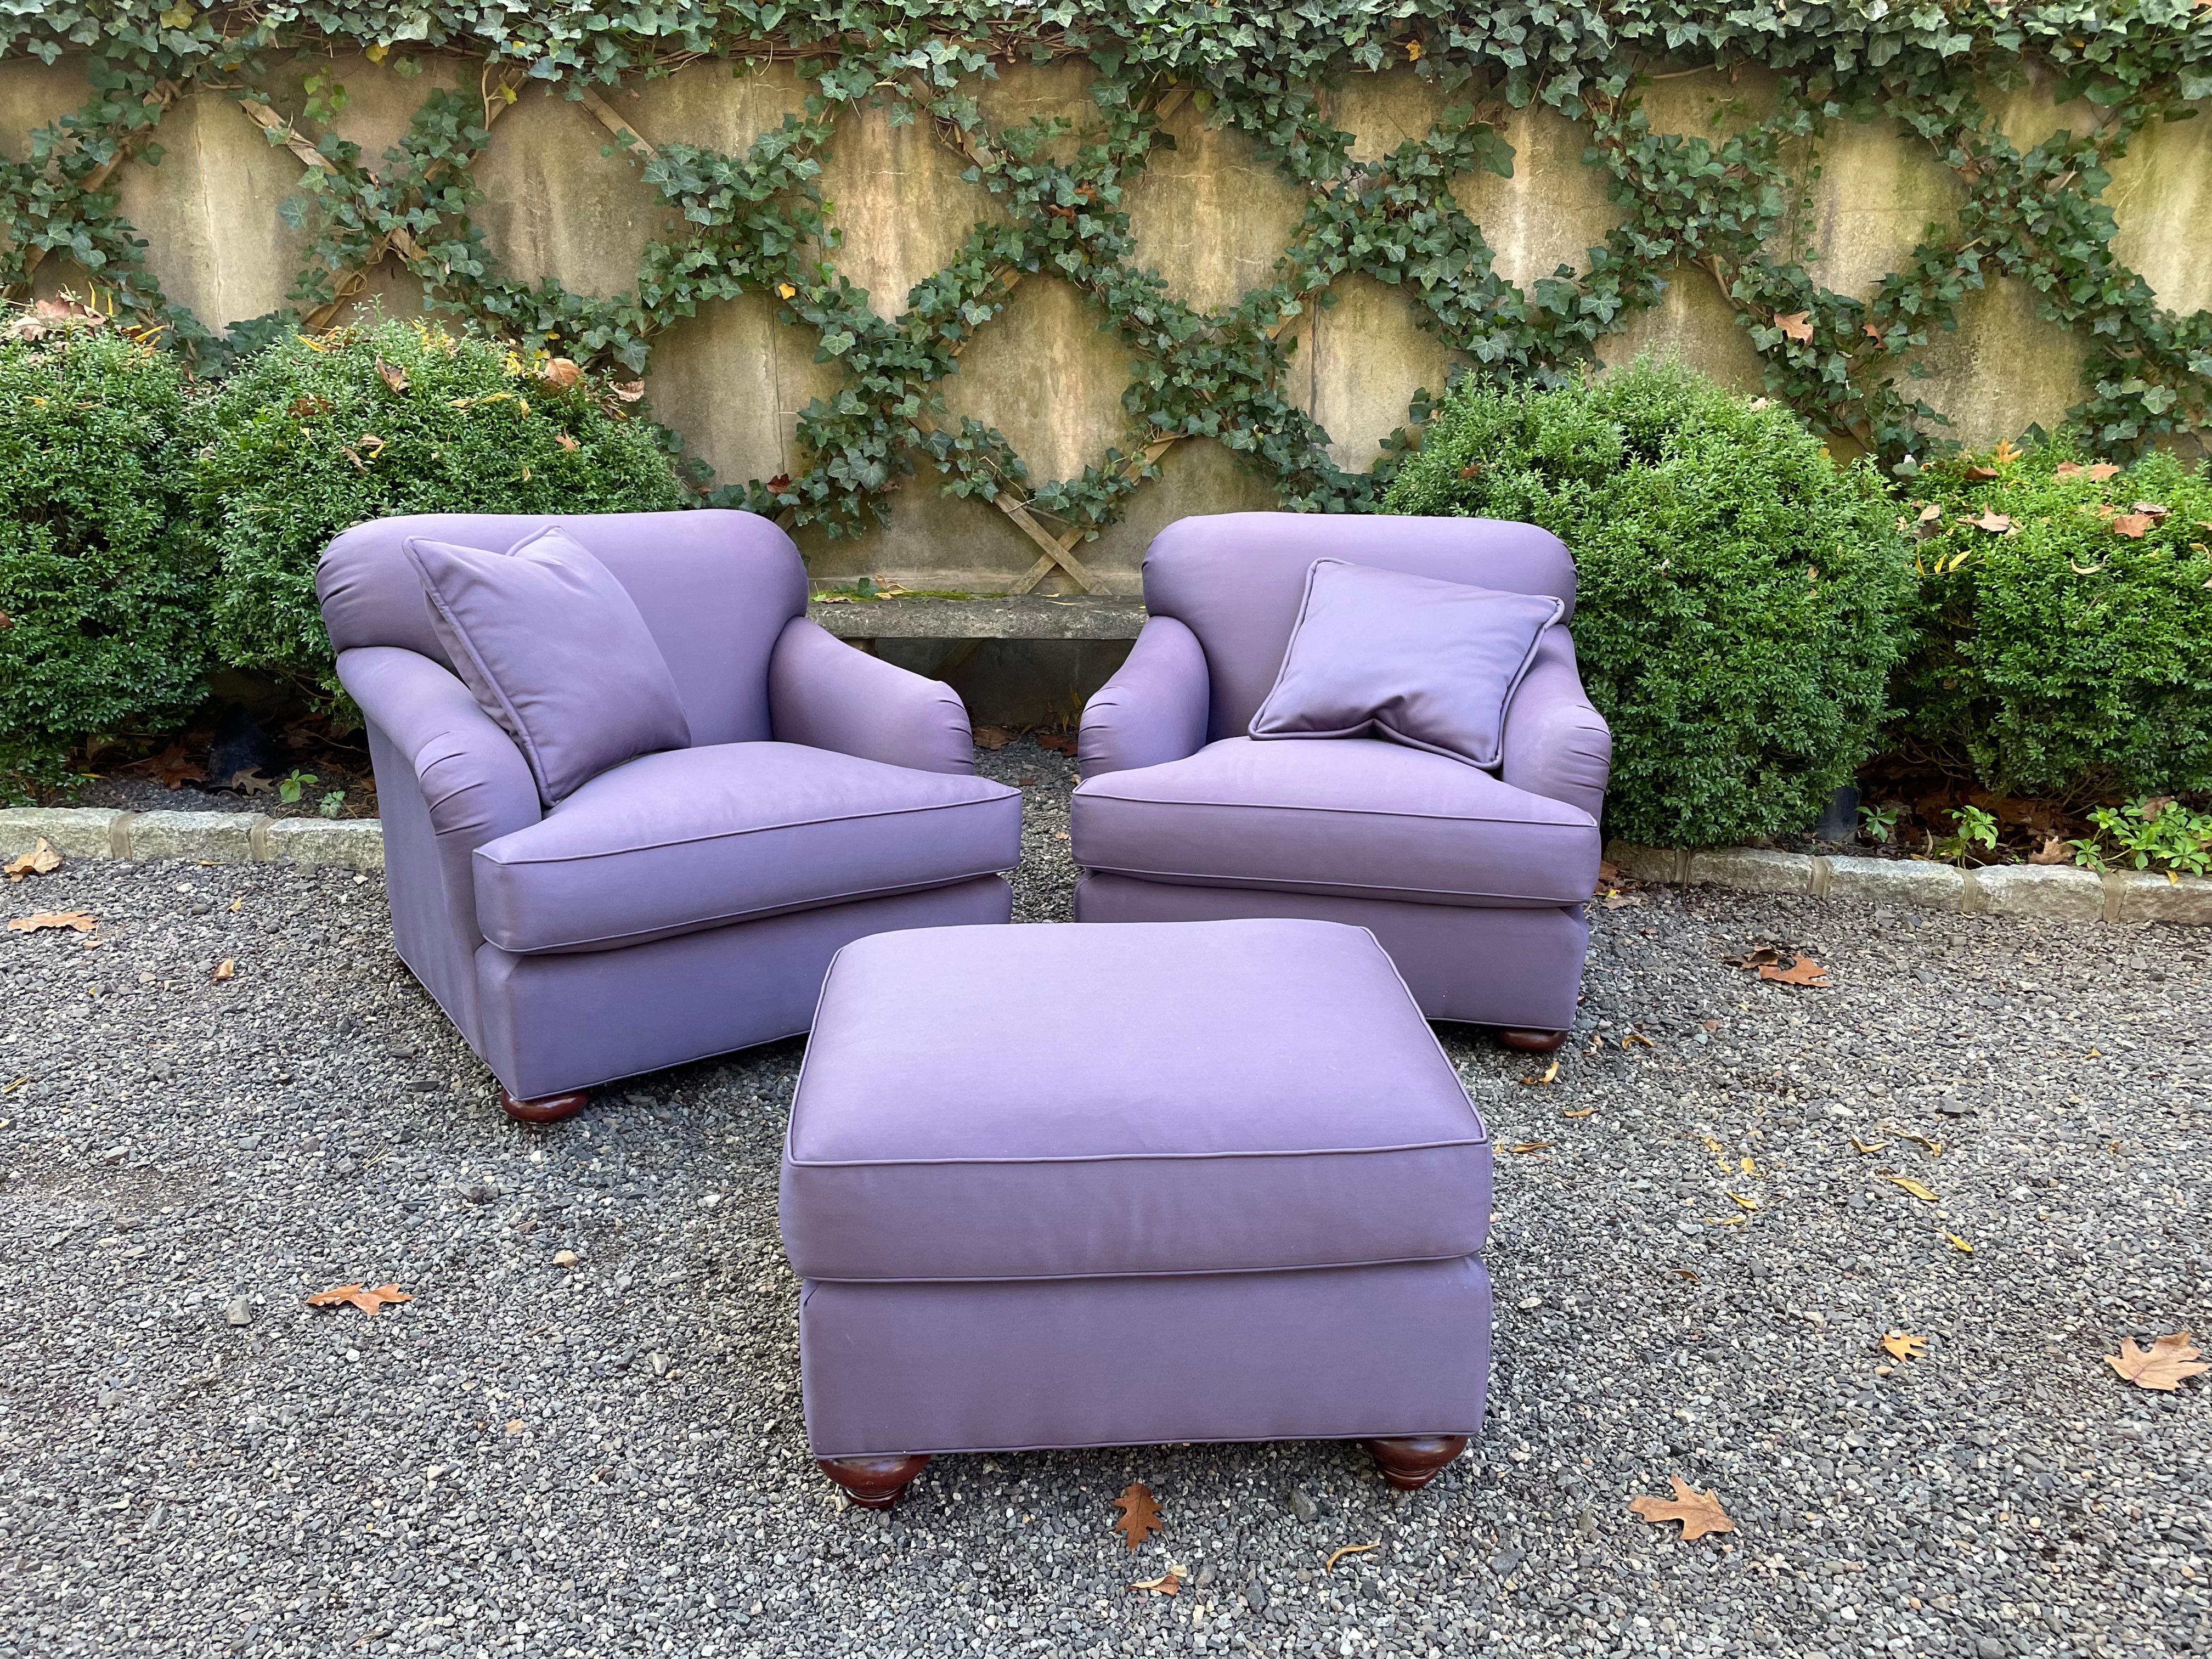 Super comfy and stylish plush pair of upholstered club chairs and matching ottoman by Baker. Upholstered in a stylish aubergine heavy weight cotton, the chairs have mahogany rounded feet in the front and splayed feet in back. The ottoman has rounded